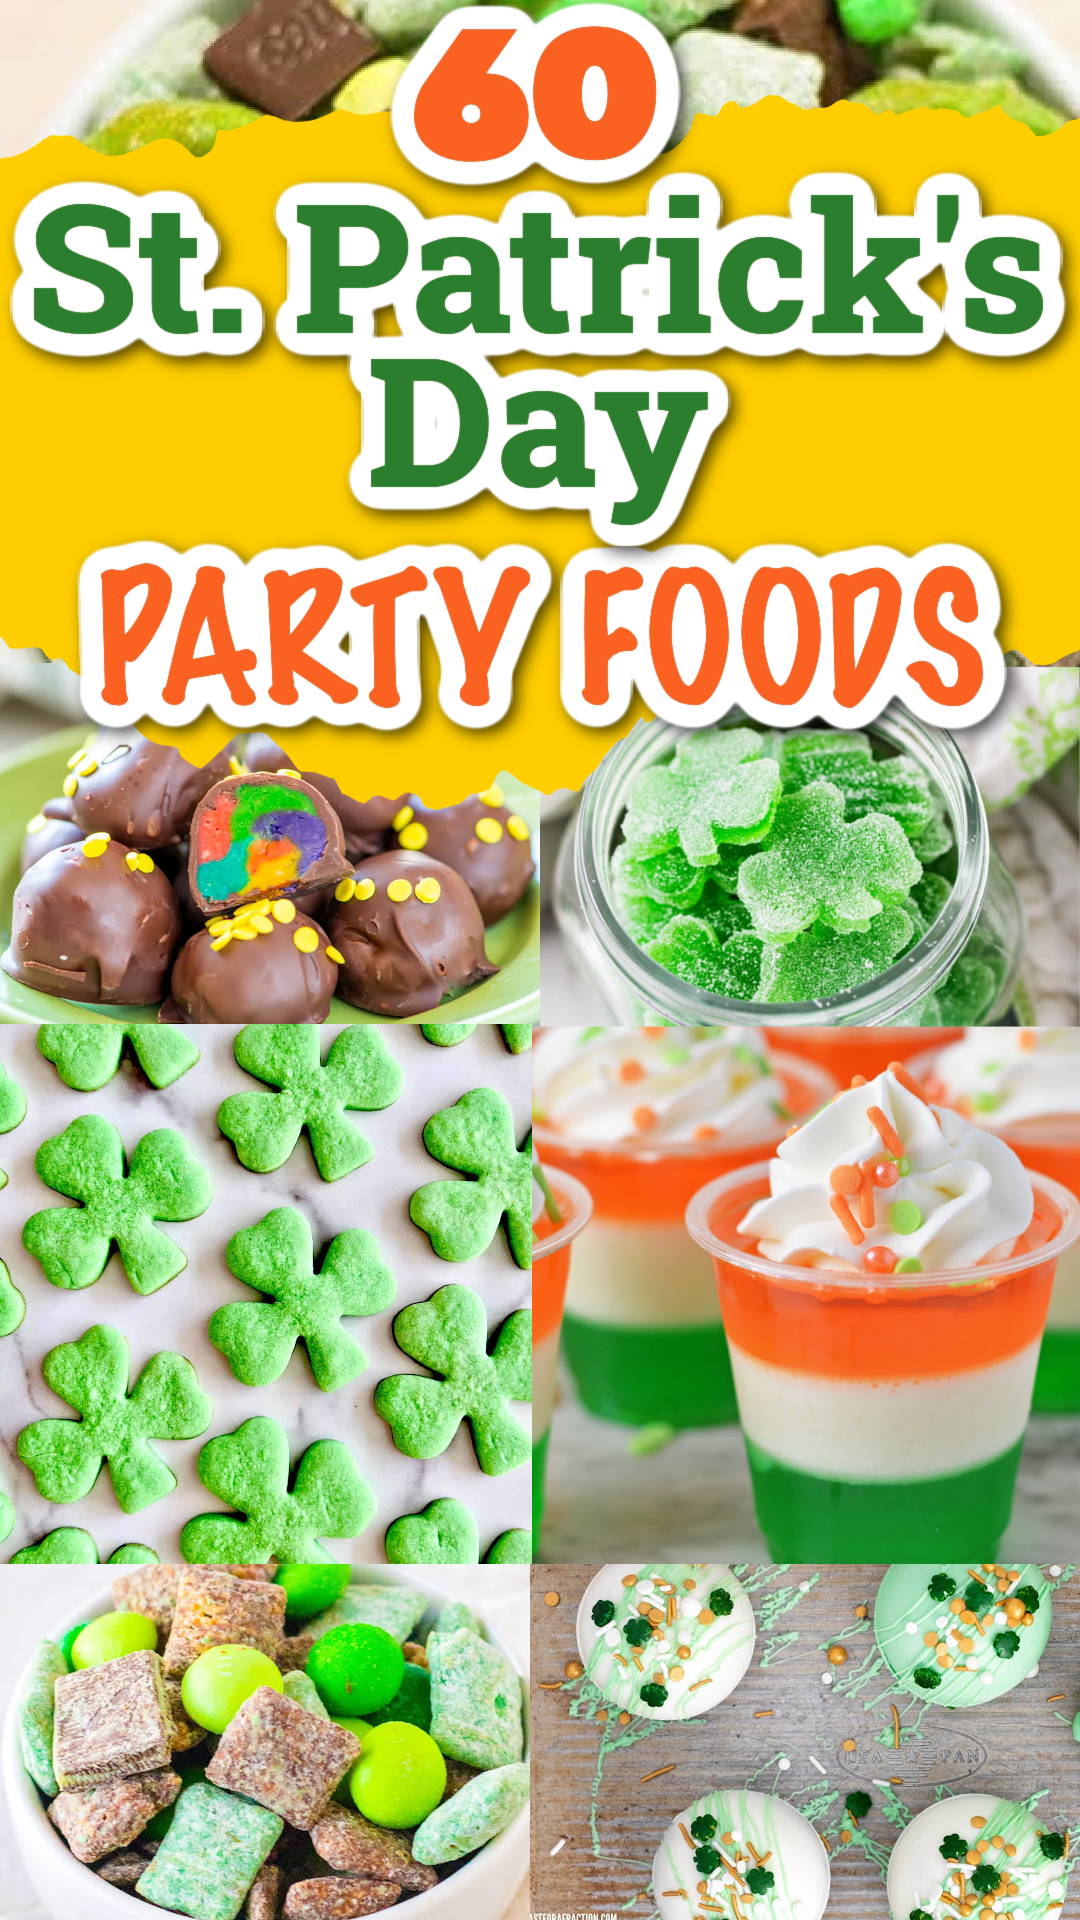 A collage of festive St. Patrick's Day party food including desserts, jello shots and cocktails.